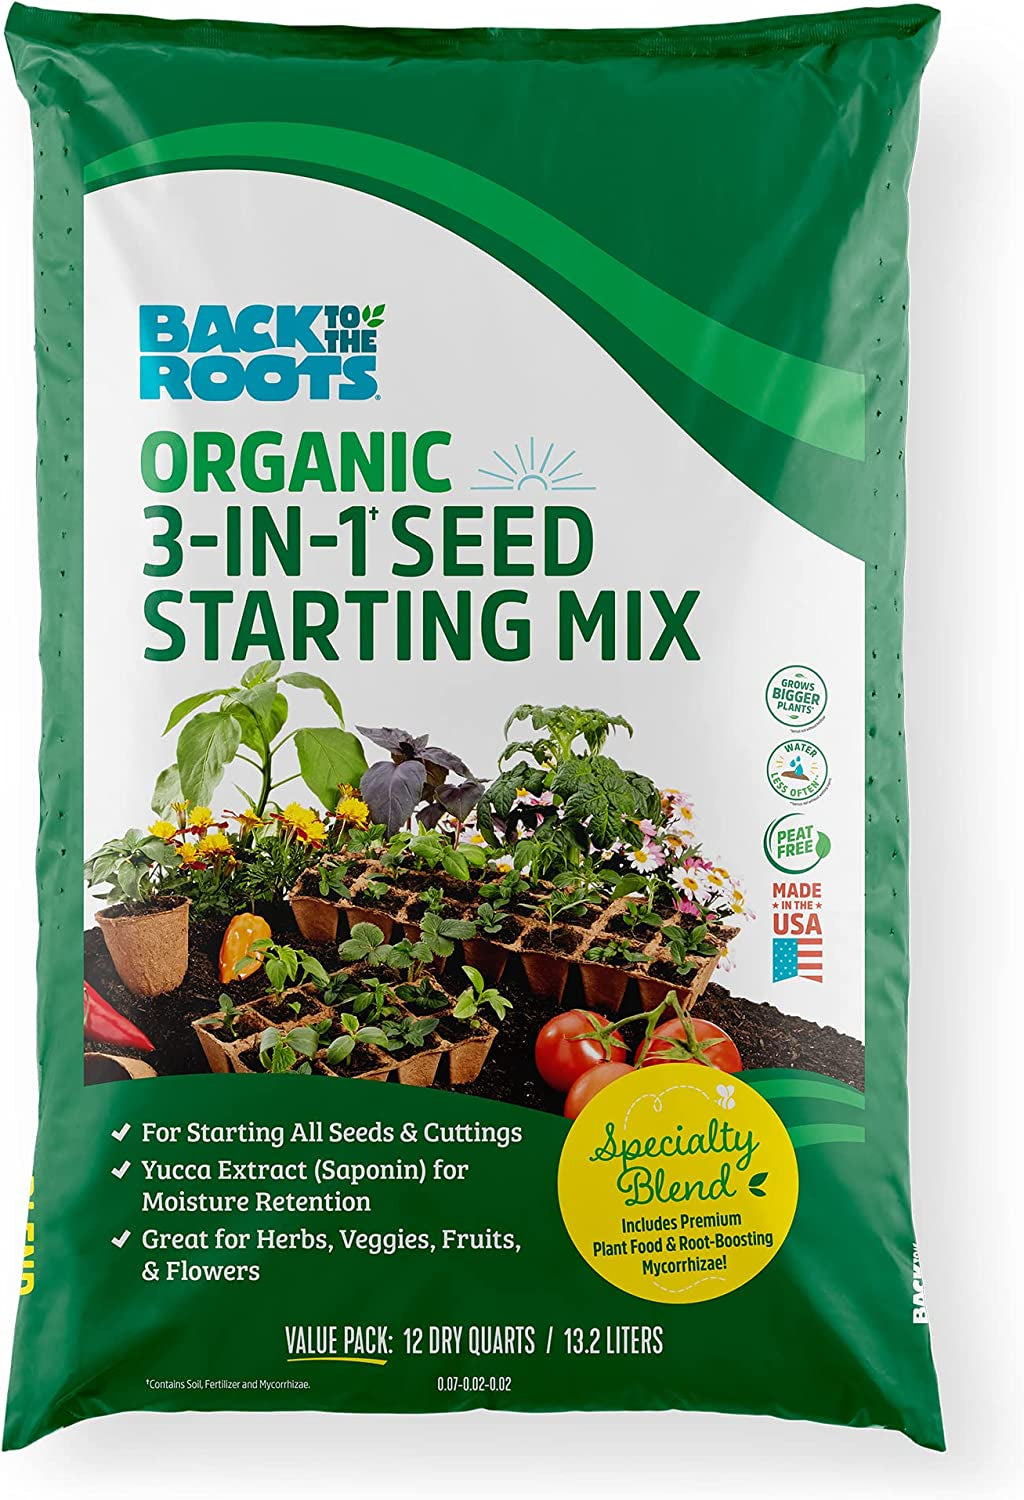 3-In-1 Seed Starting Mix 12 Quarts, 100% Organic & USA Made for Herbs, Veggies, Flowers, W/ Nutrient Rich Plant Food, Worm-Castings, & Moisture Controlling Yucca Brown